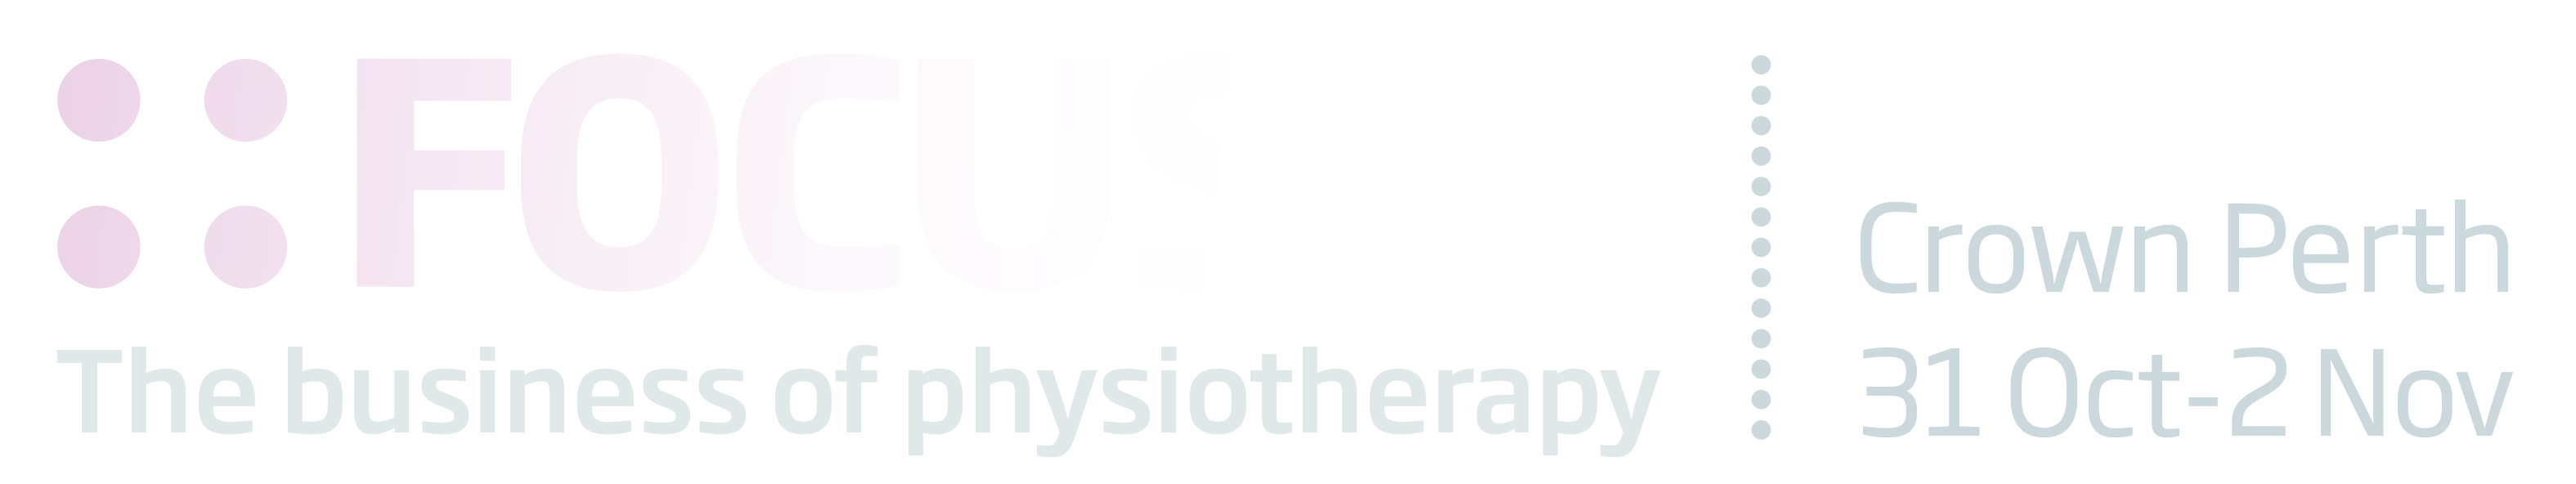 Focus24 The business of physiotherapy